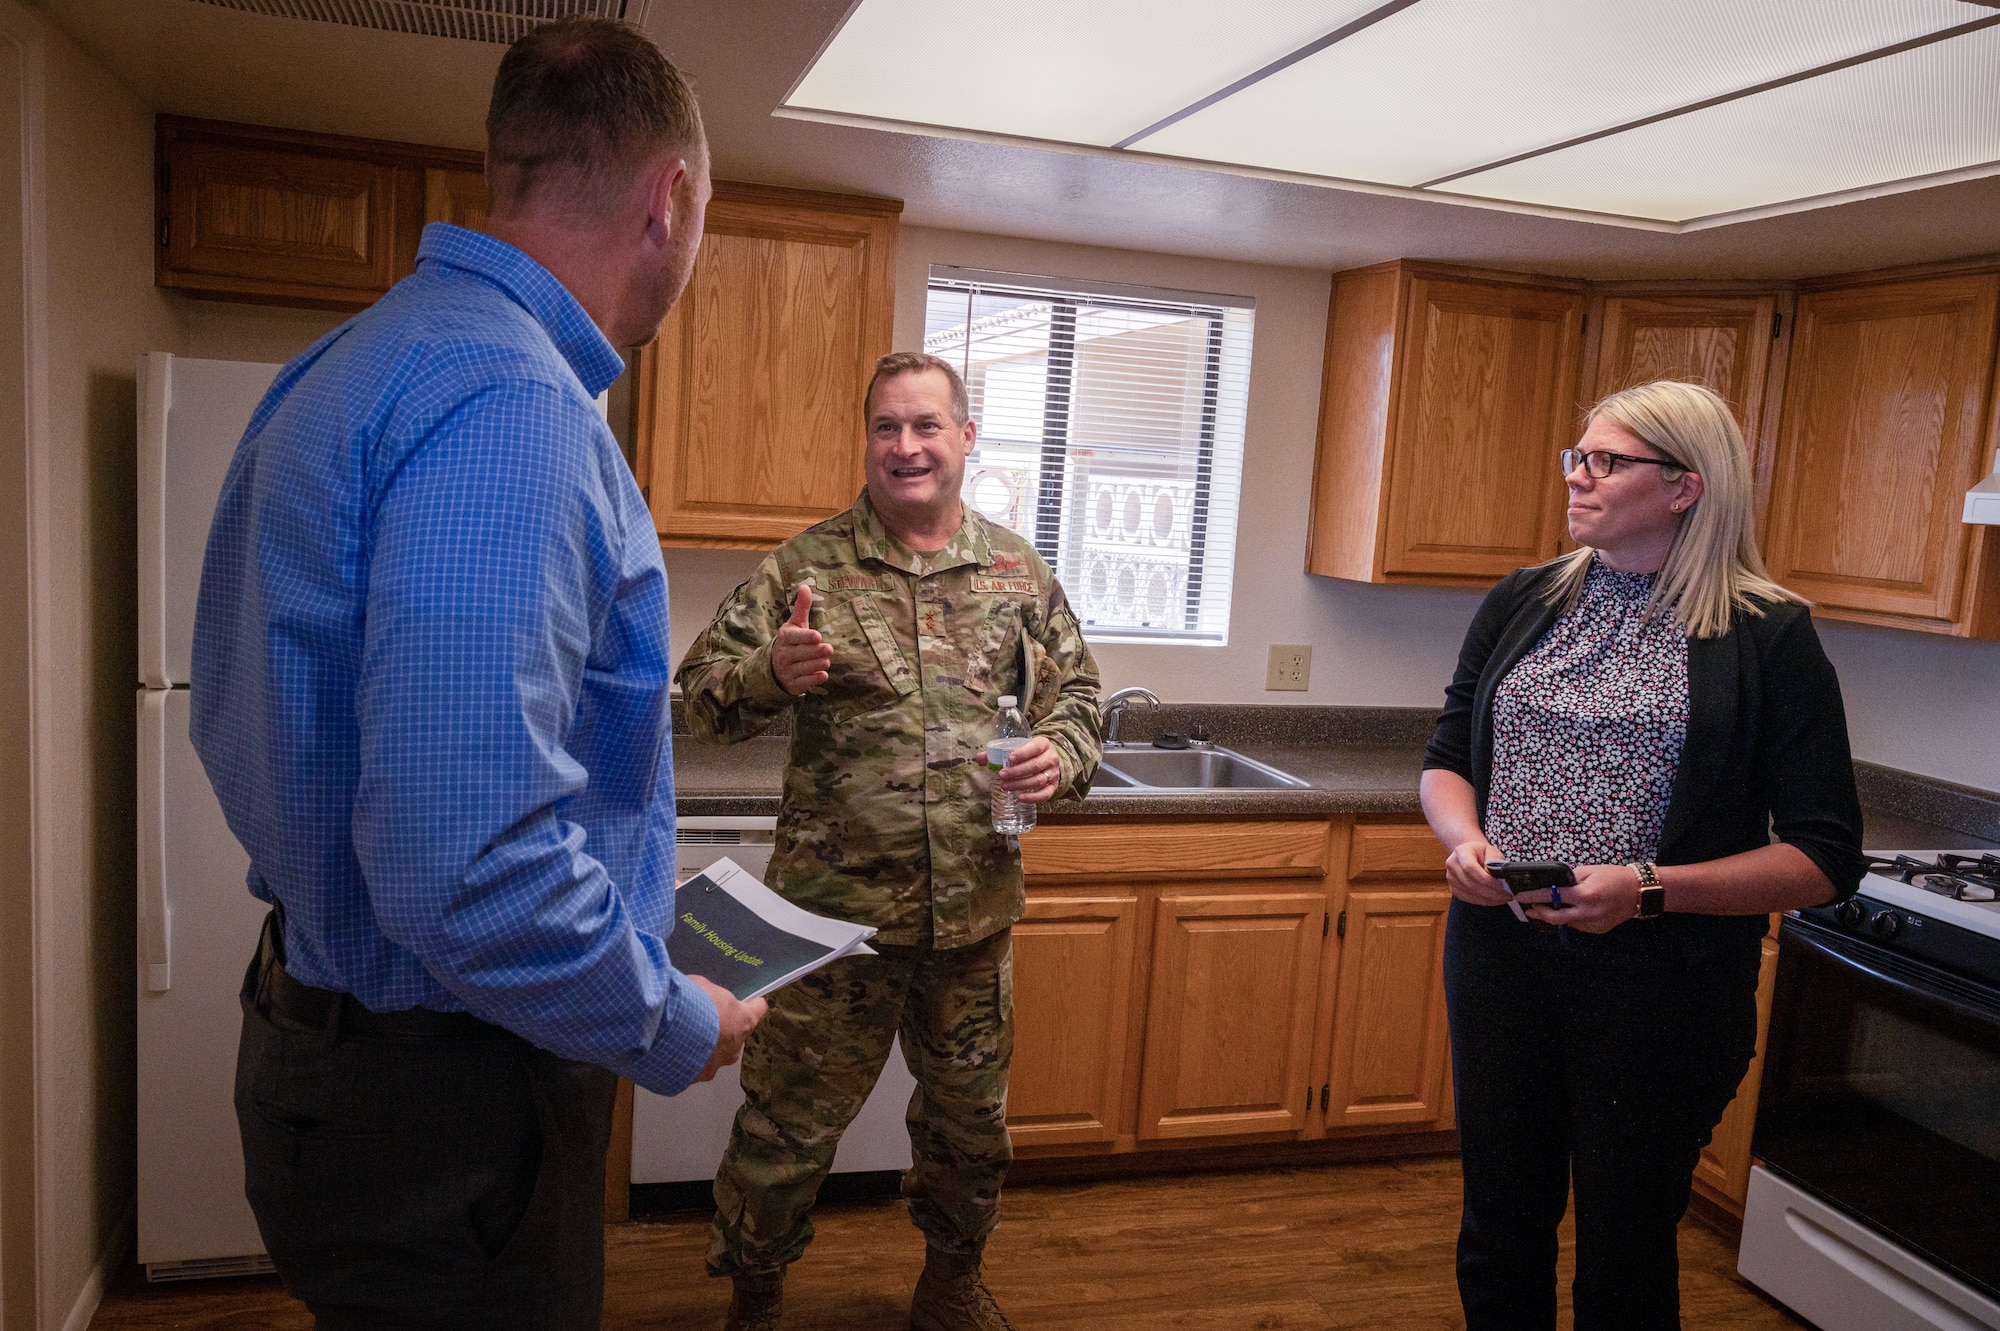 Maj. Gen. Phillip Stewart, 19th Air Force commander, engaged with members of the Balfour Beaty Communities Housing Office at Luke Air Force Base, Arizona, Feb. 15, 2023.